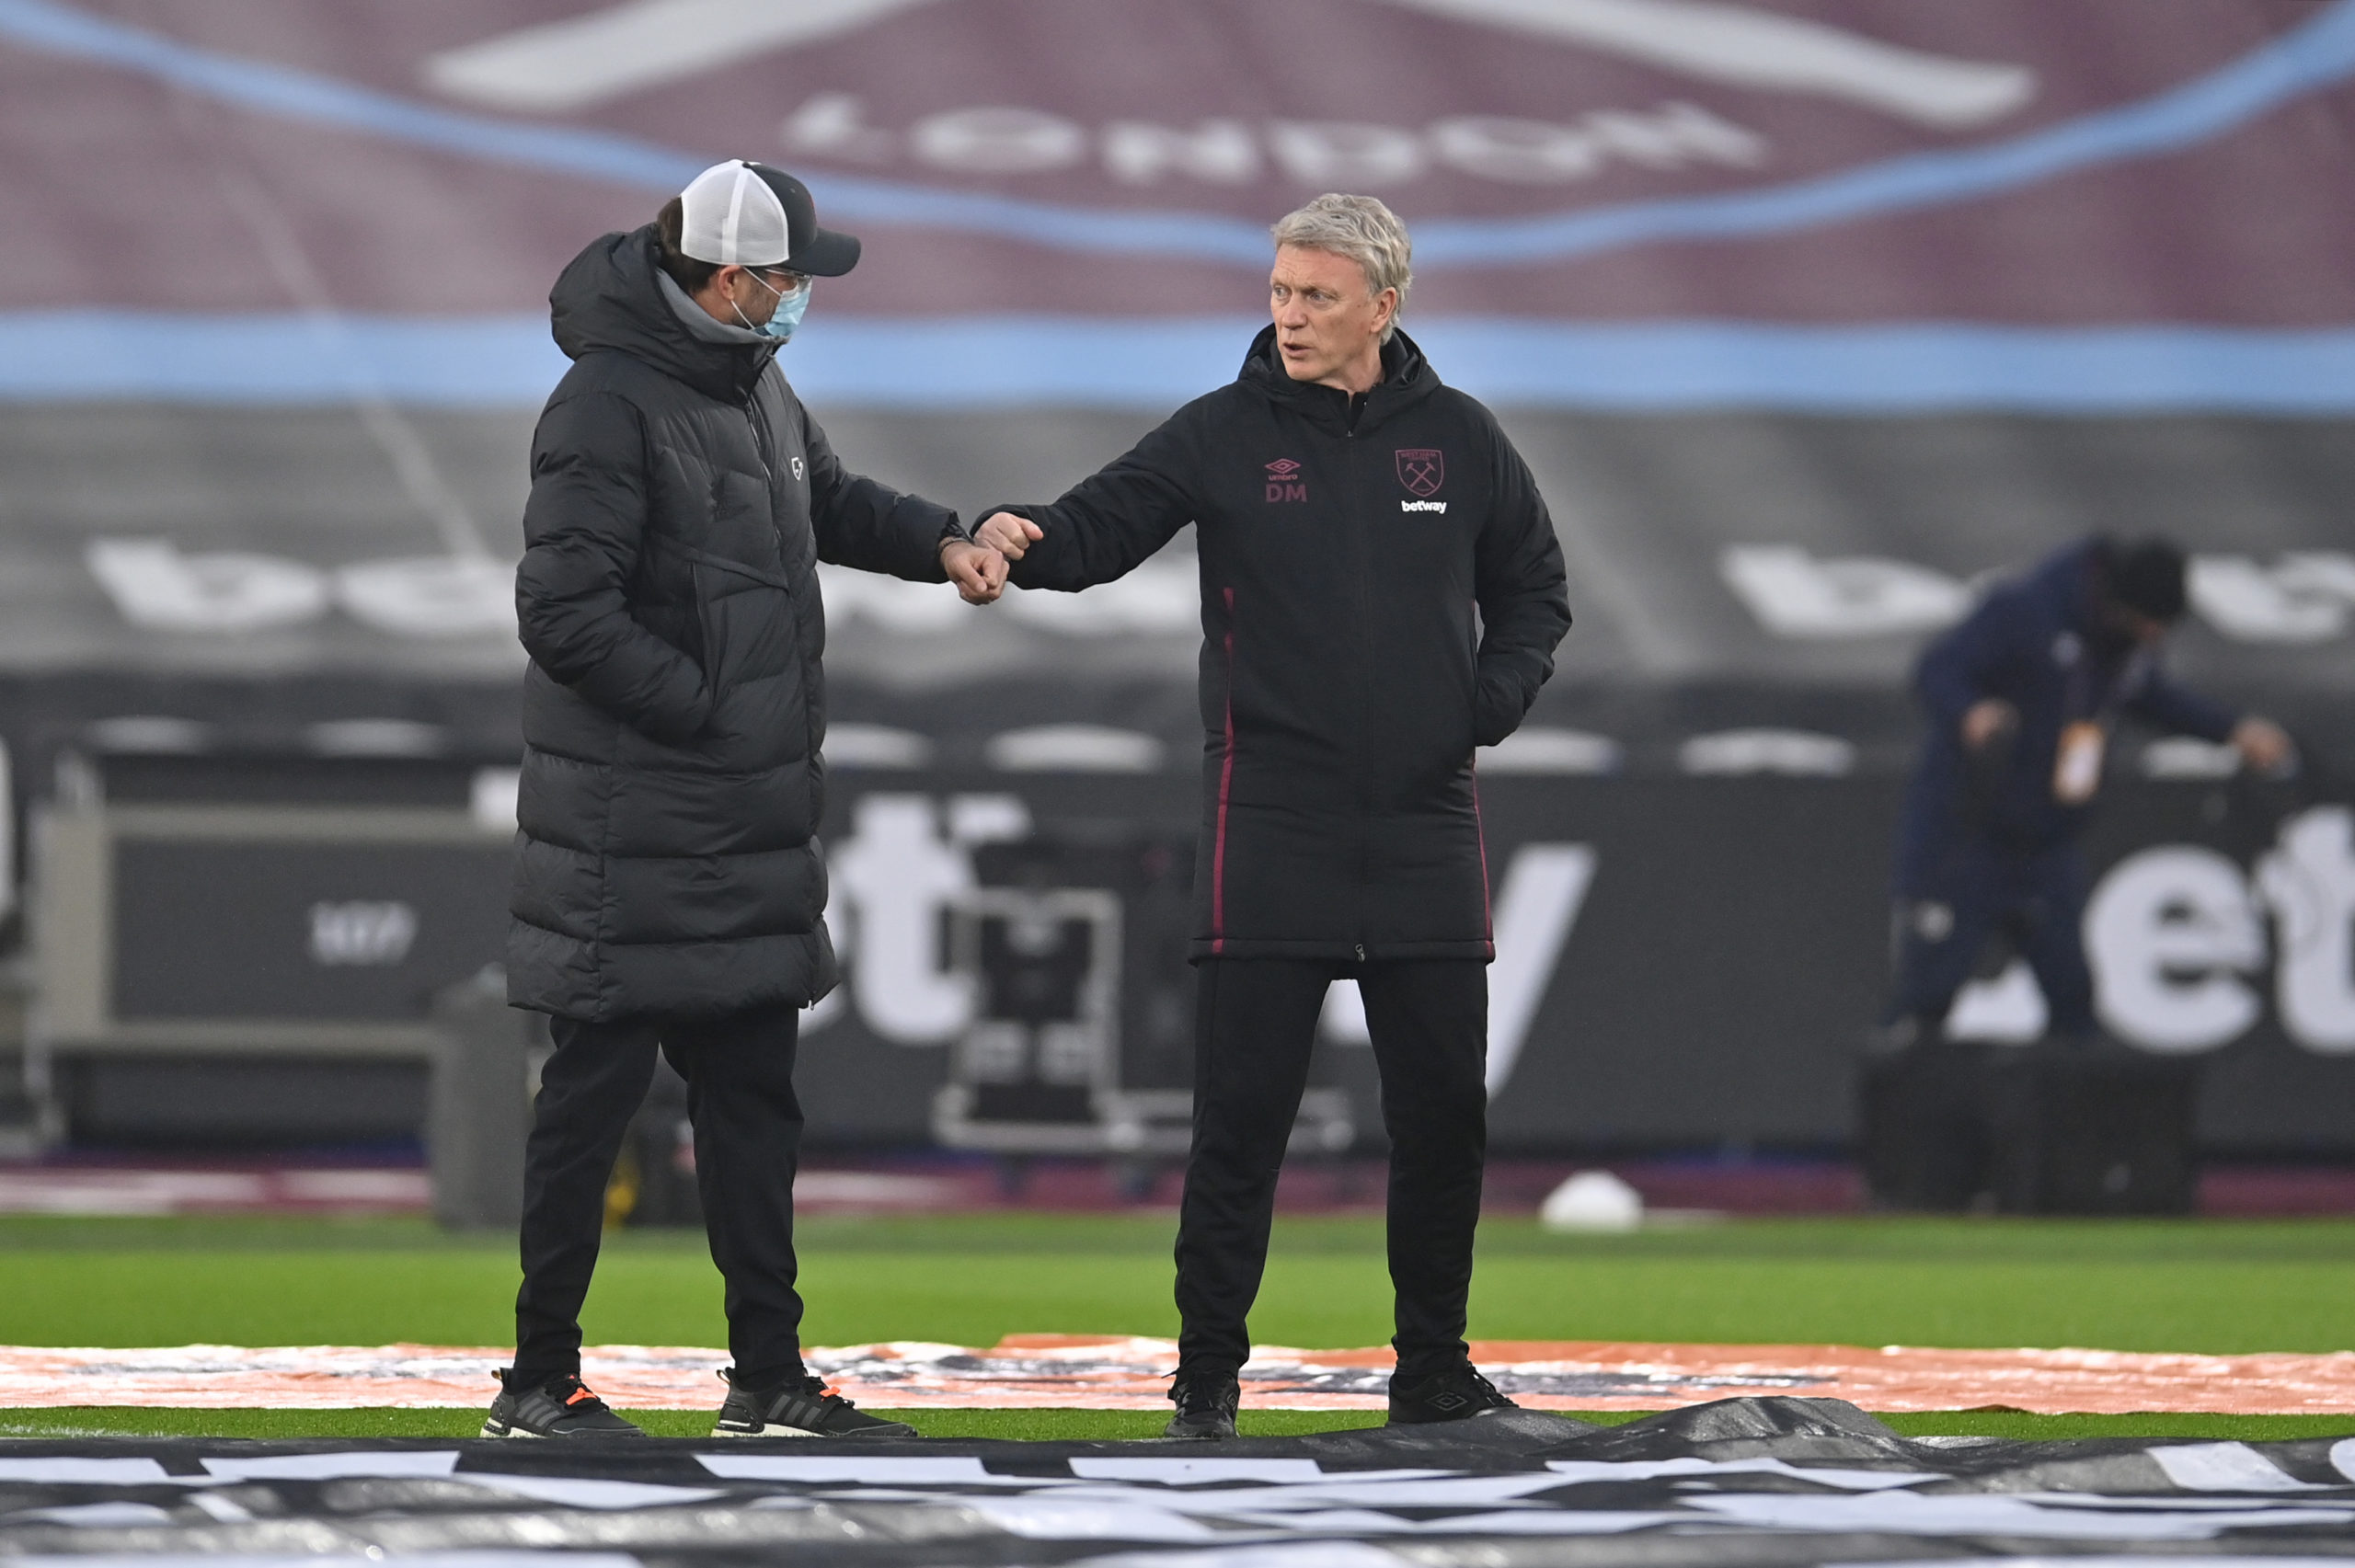 West Ham United boss David Moyes was speaking extensively with Liverpool manager Jurgen Klopp before last night's game at Anfield